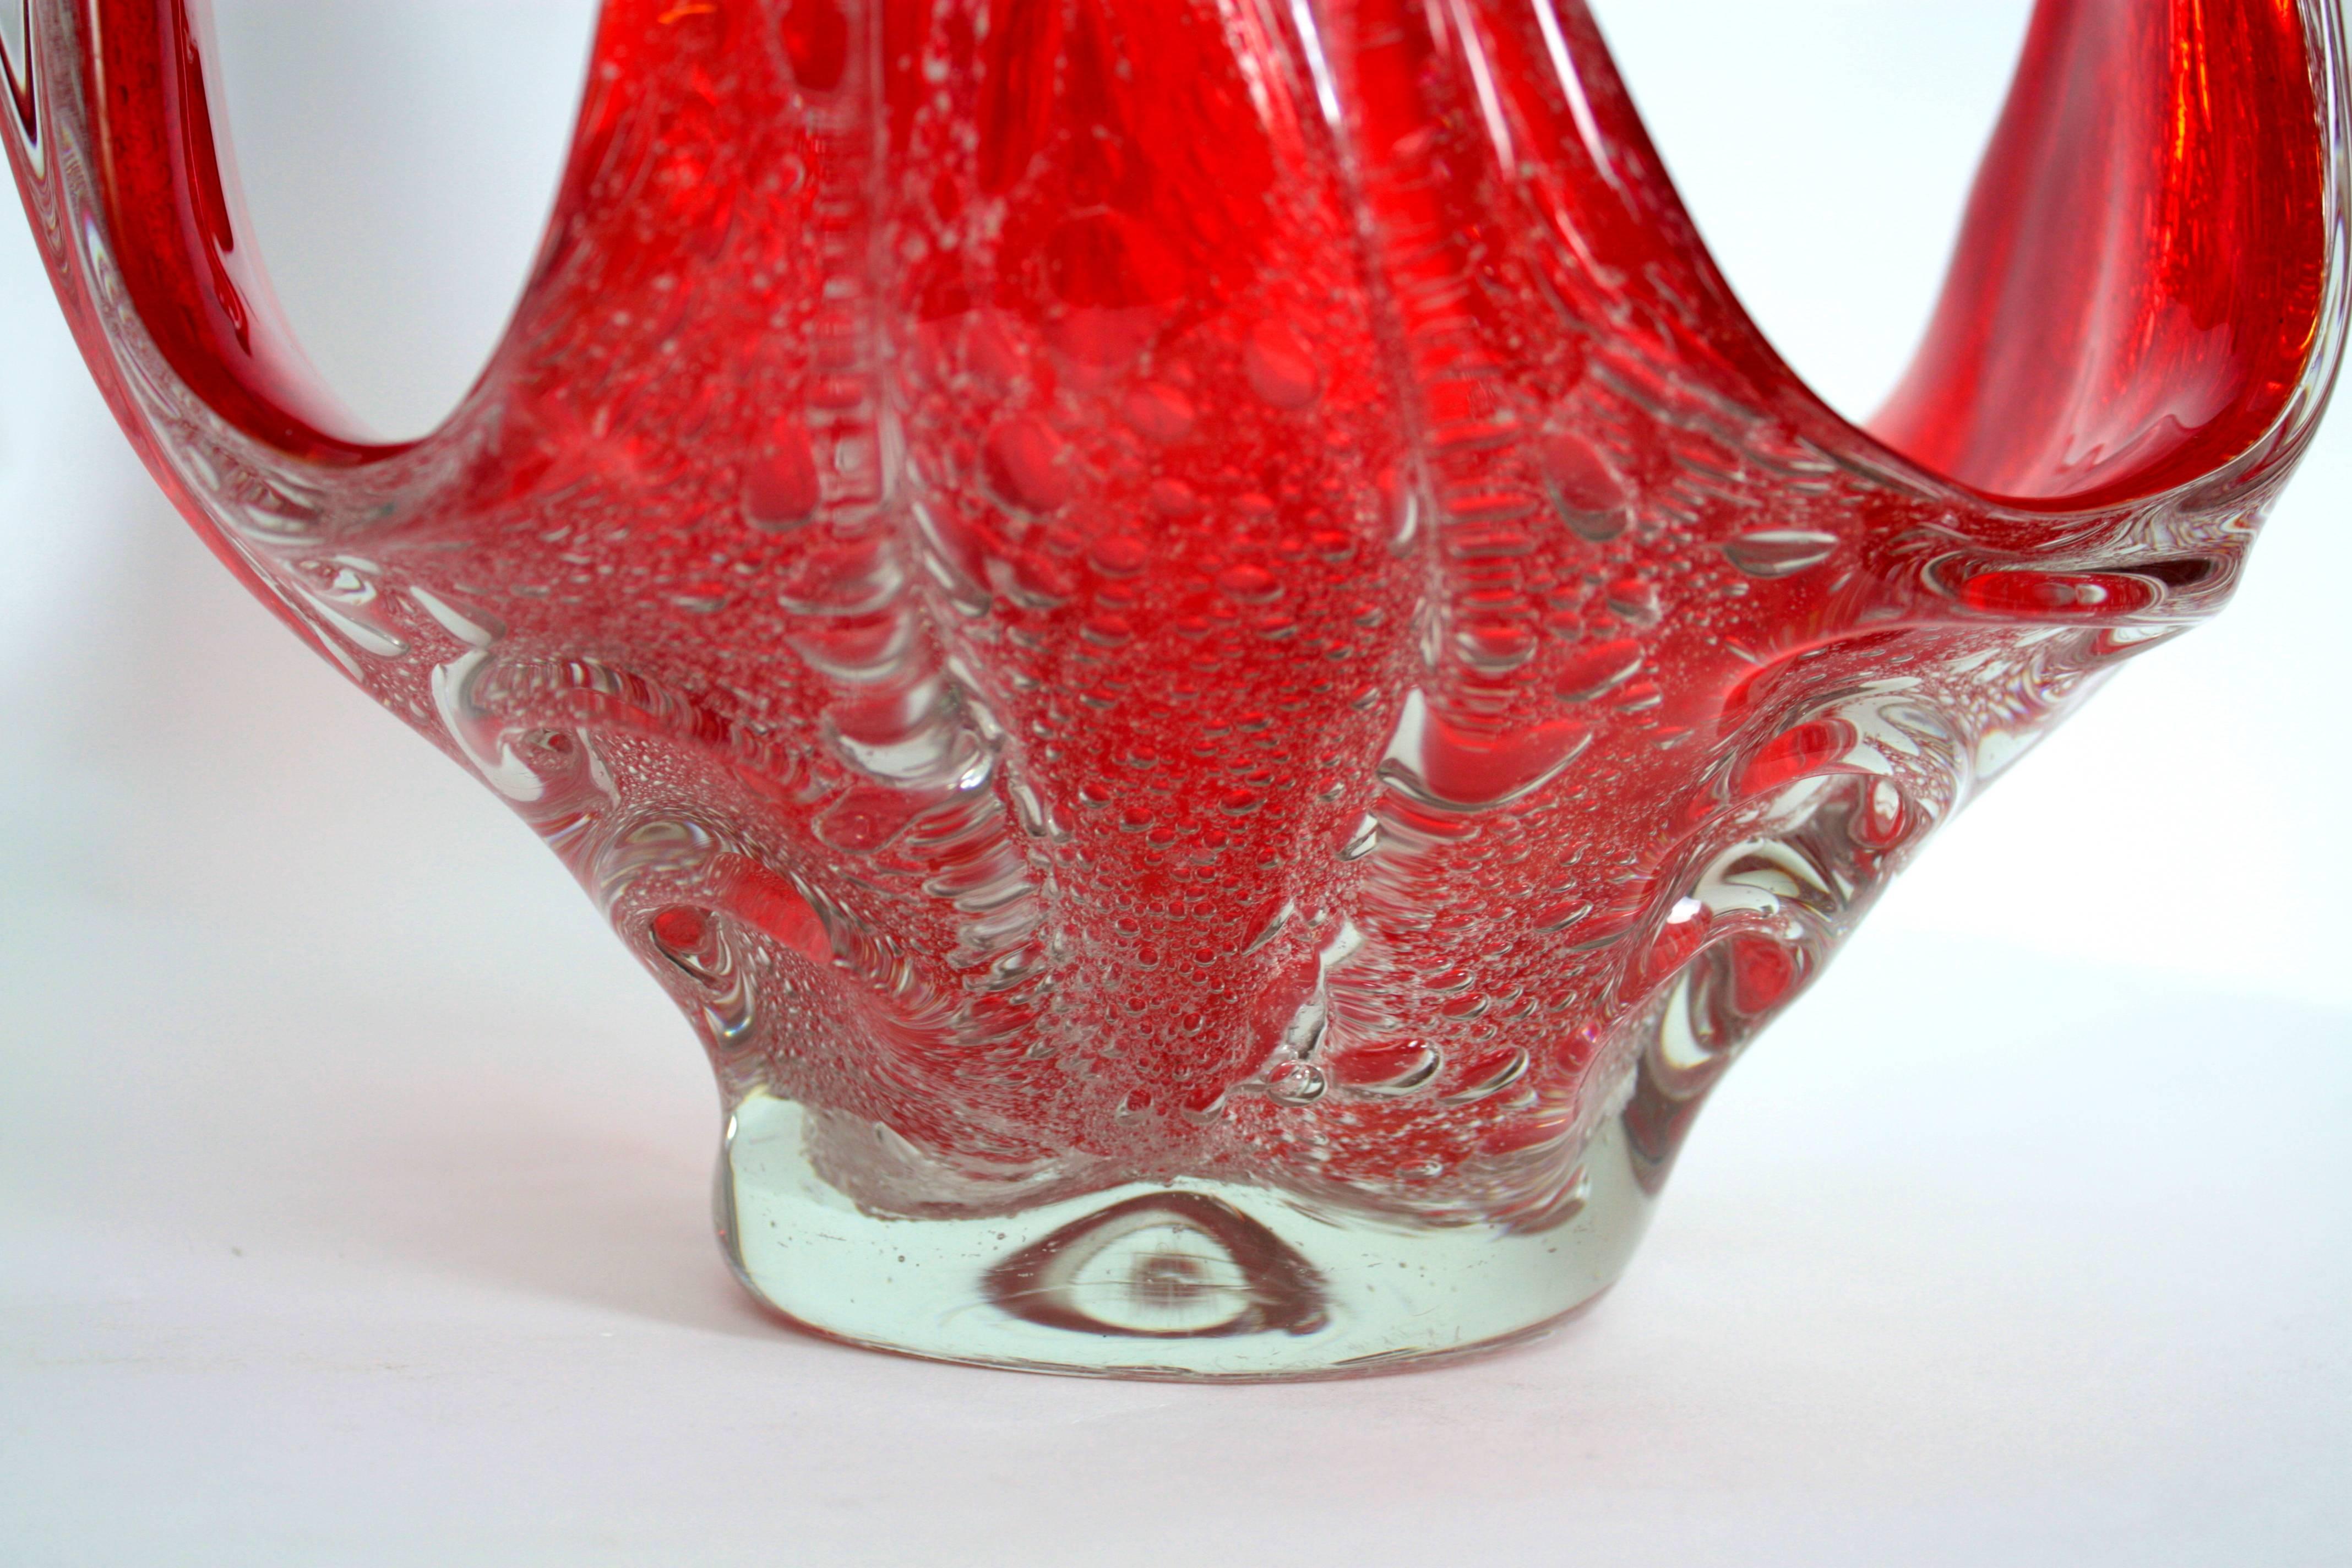 Spectacular Murano glass vase or centerpiece in a vibrant red color cased into clear glass. Hundreds of controlled bubbles with the "Pulegoso" technique.
A highly decorative piece with amazing color and shapes,
Italy, 1950s.

This